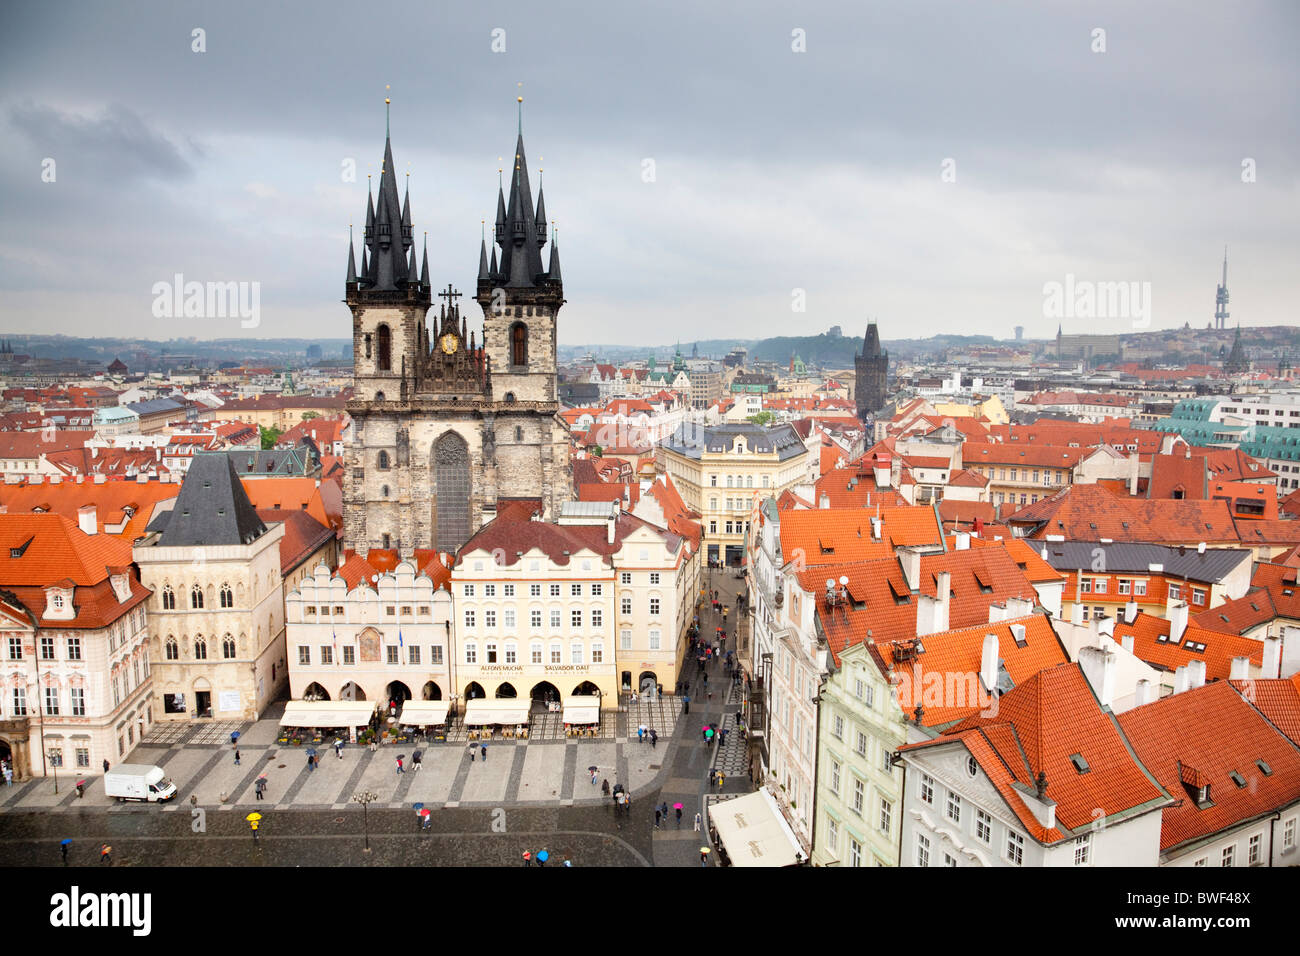 Old town square seen from the tower of the old Town Hall, Prague Czech Republic 2010 Stock Photo